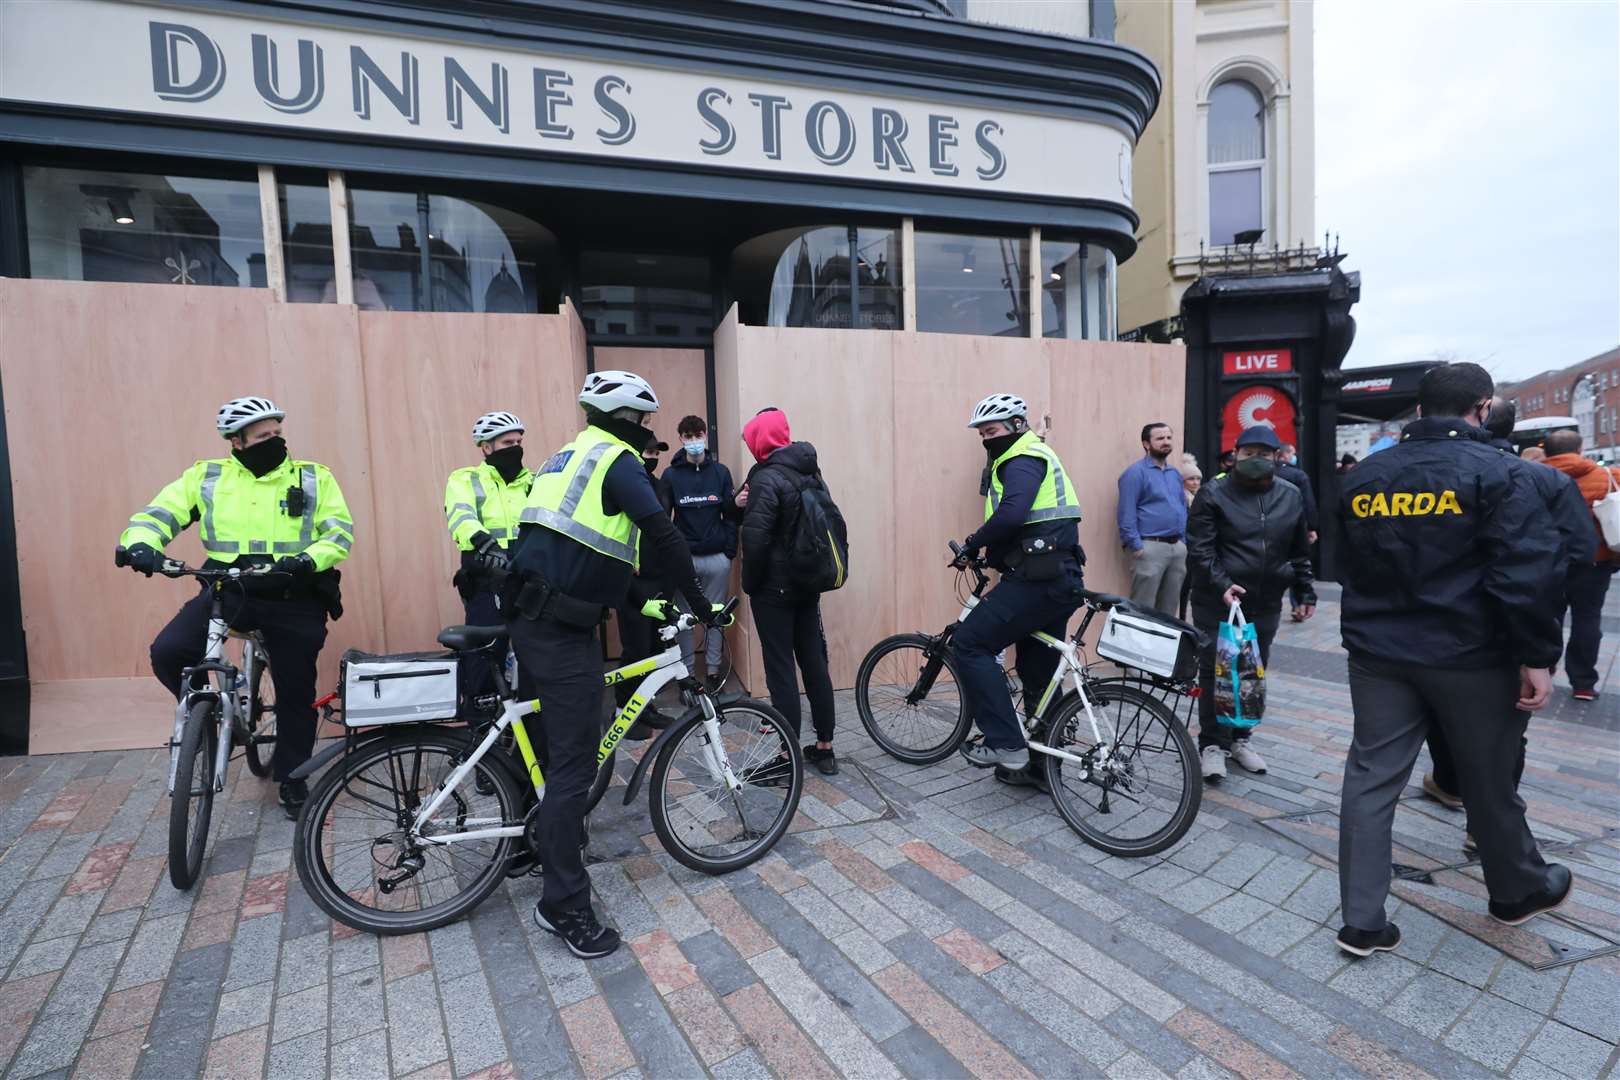 Gardai stop and search people before a demonstration against lockdown restrictions organised by the People’s Convention in Cork city centre (Niall Carson/PA)